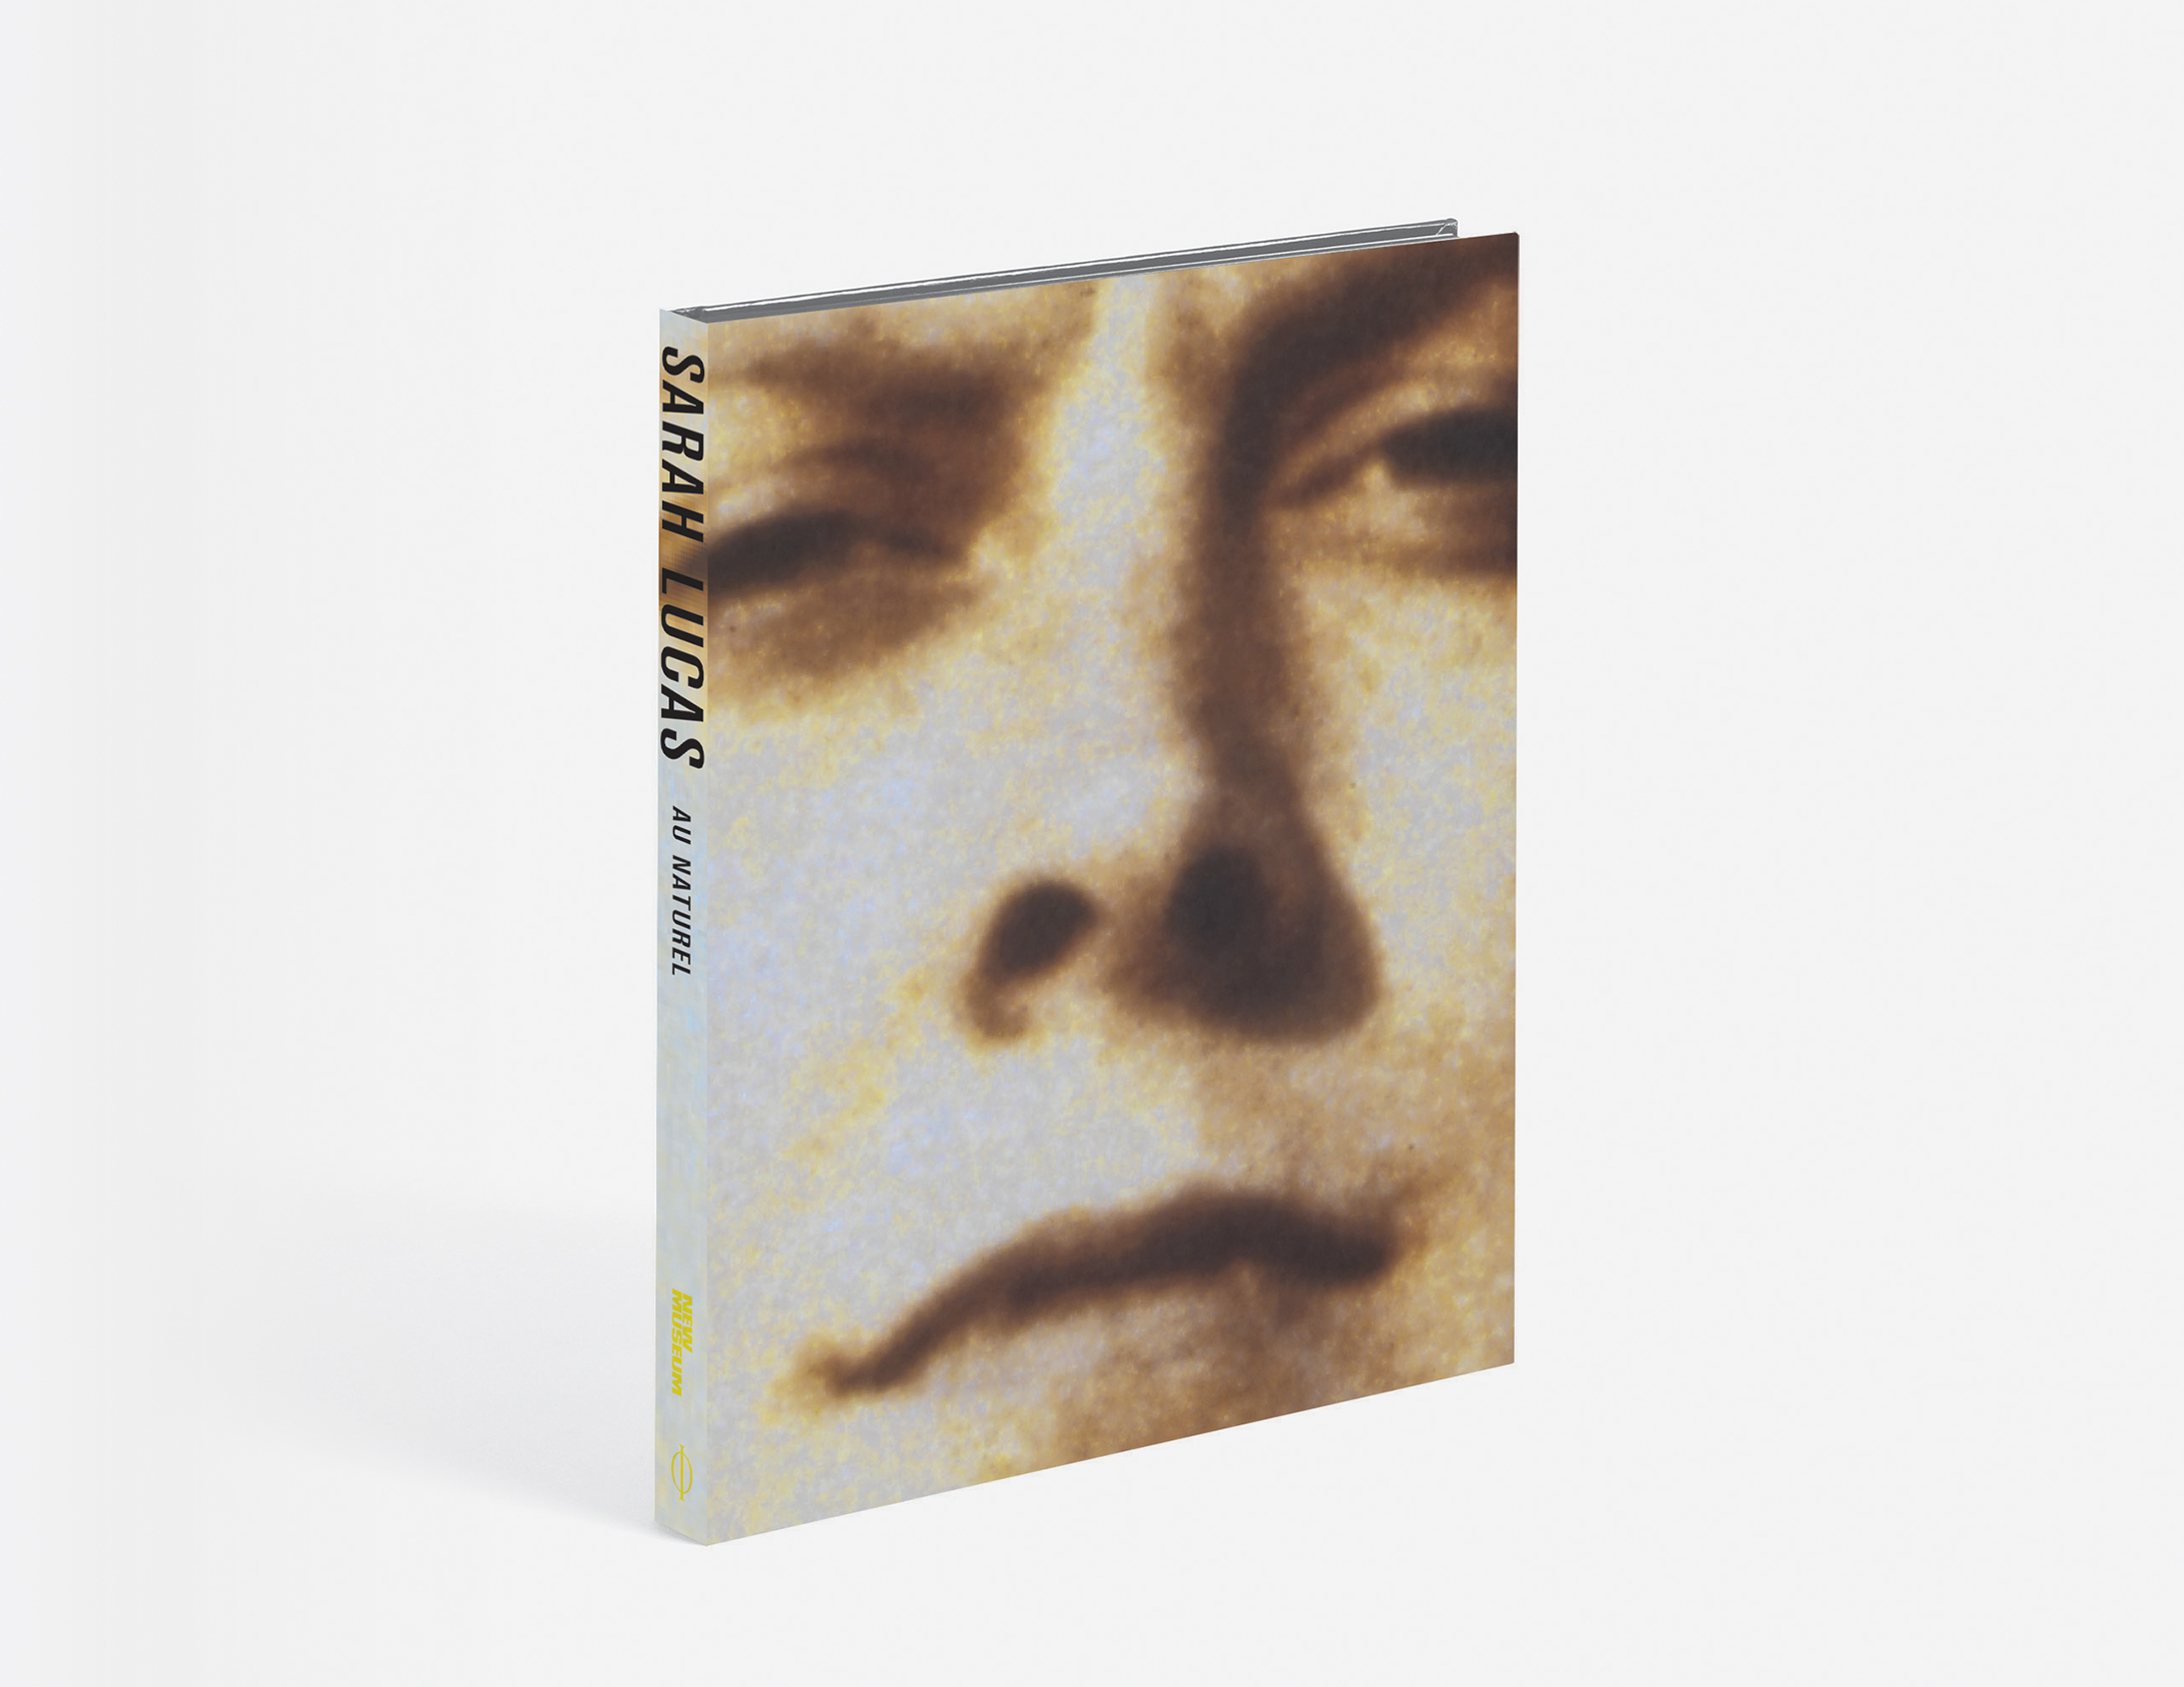 Sarah Lucas: Au Naturel is available on Arspace for $79